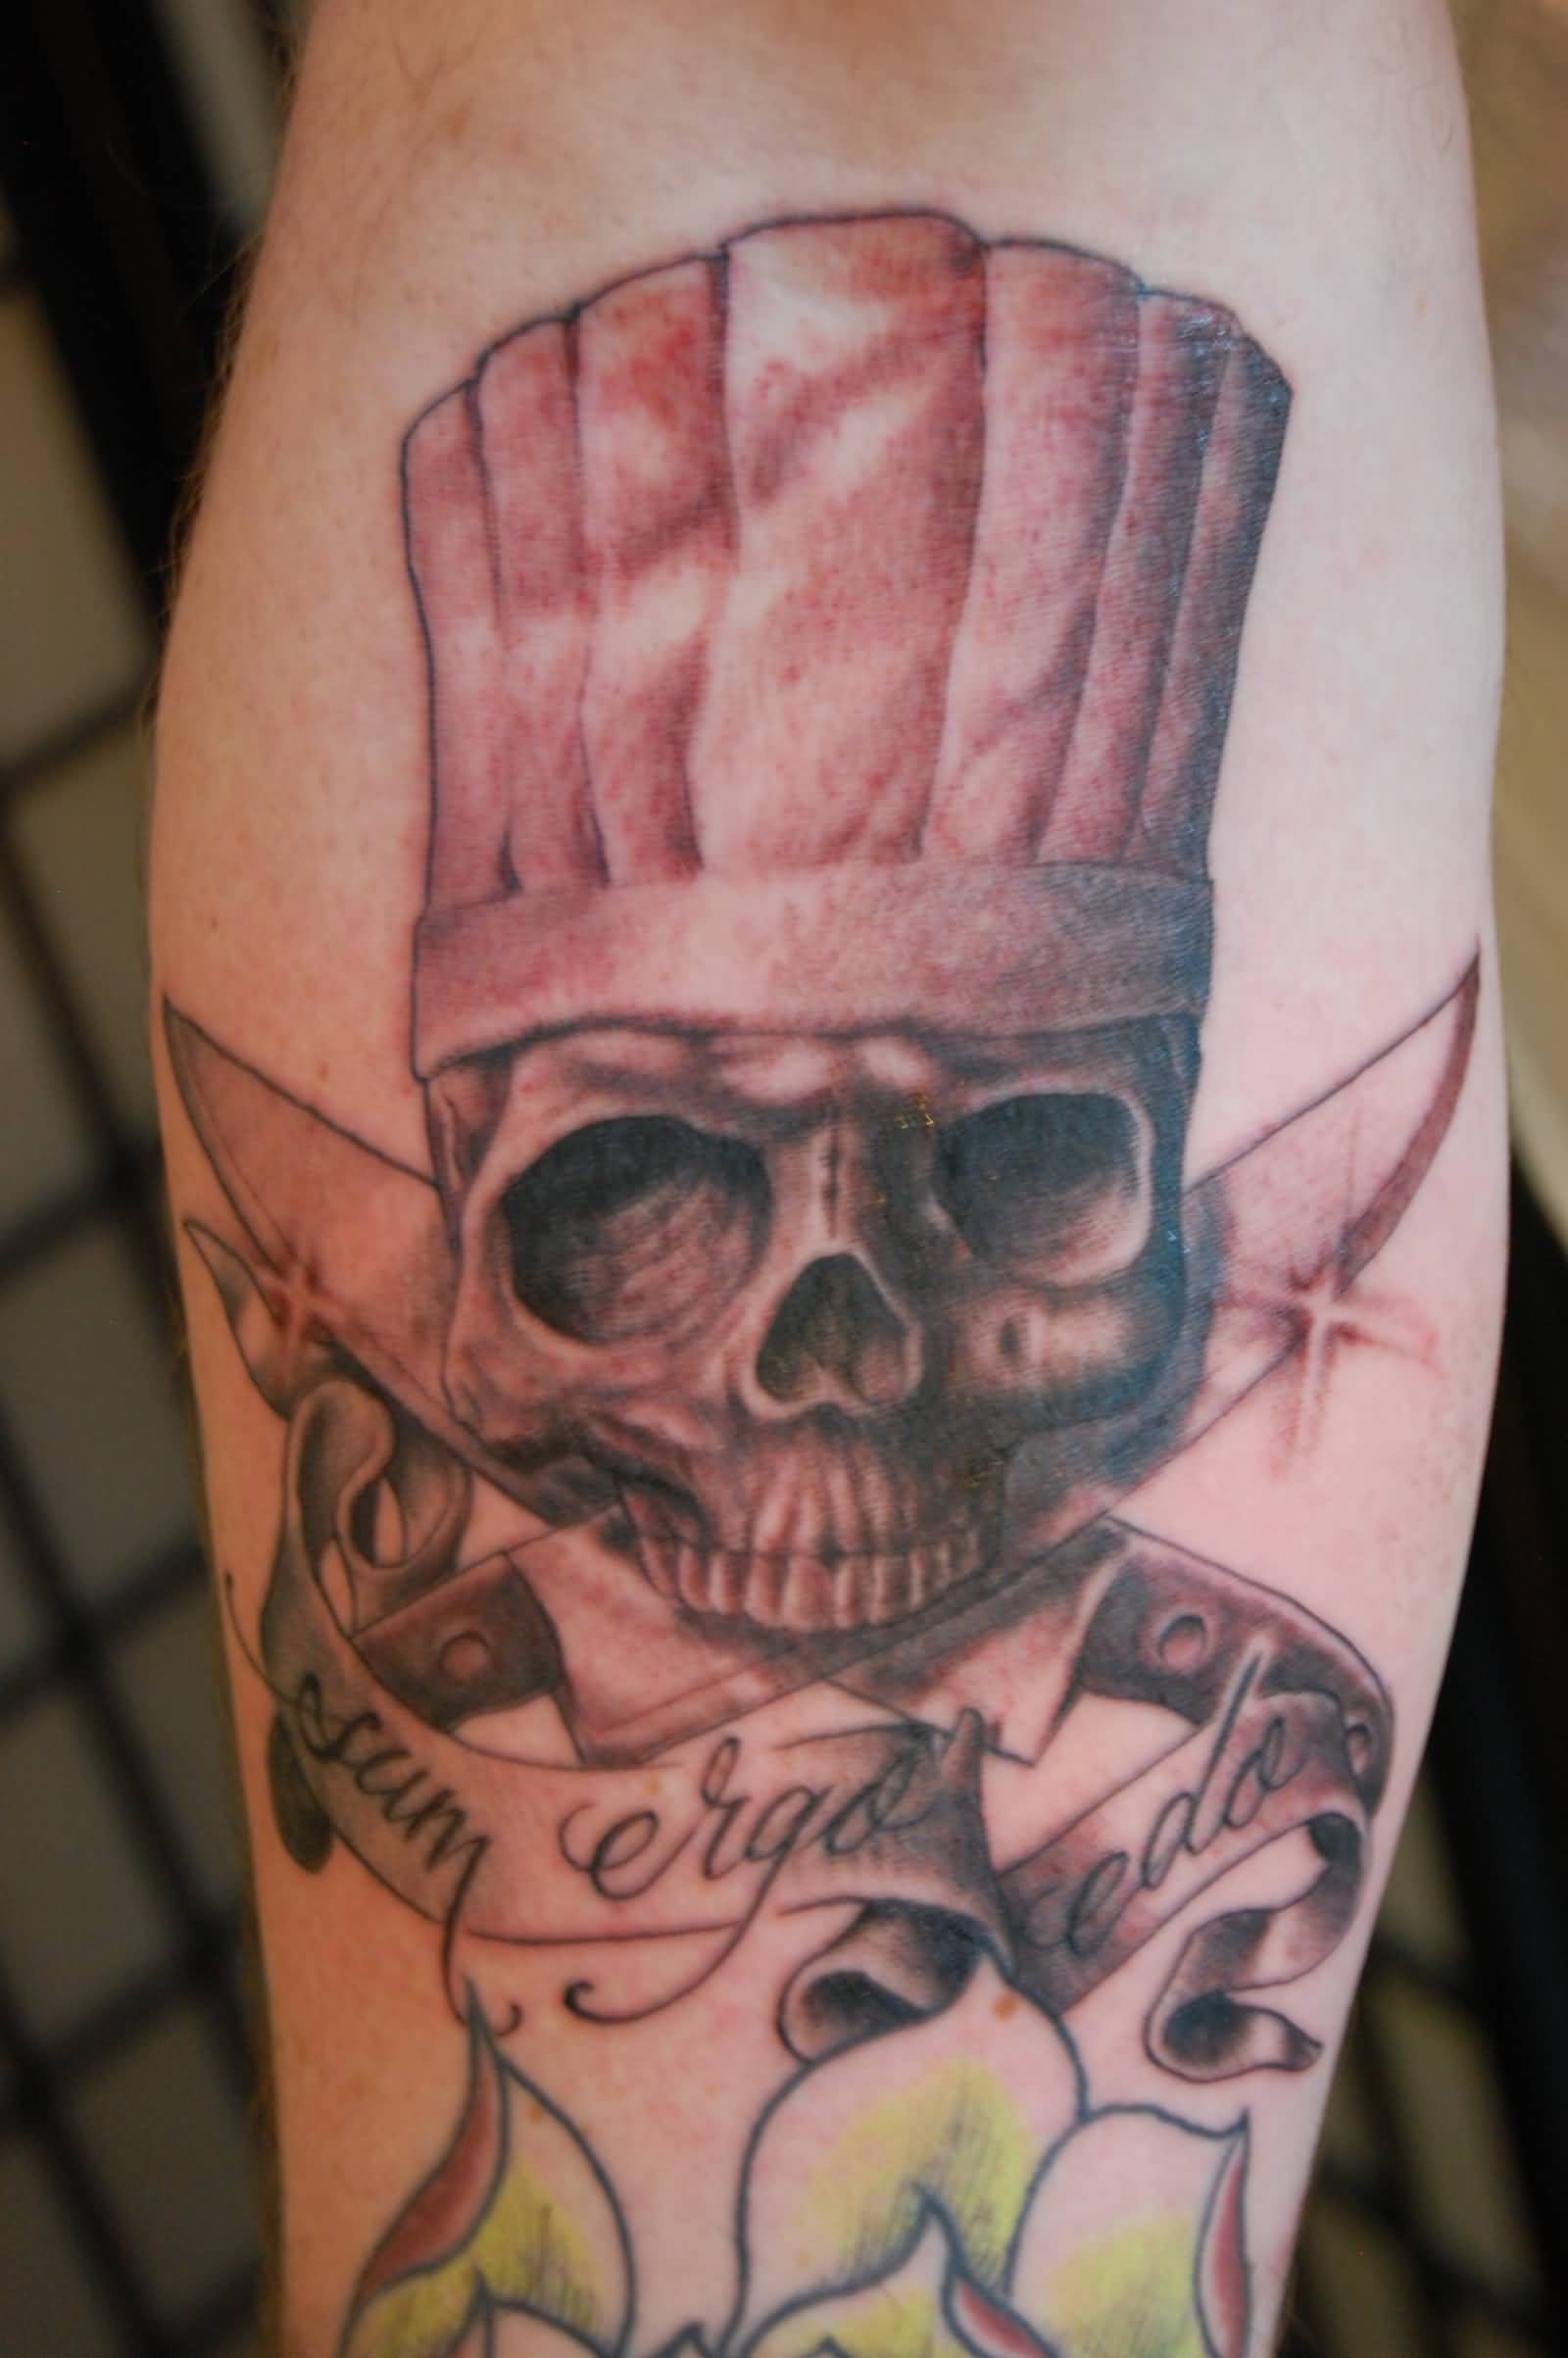 Chef Skull With Knives And Sum, Ergo, Cedo On Banner Tattoo On Arm Sleeve